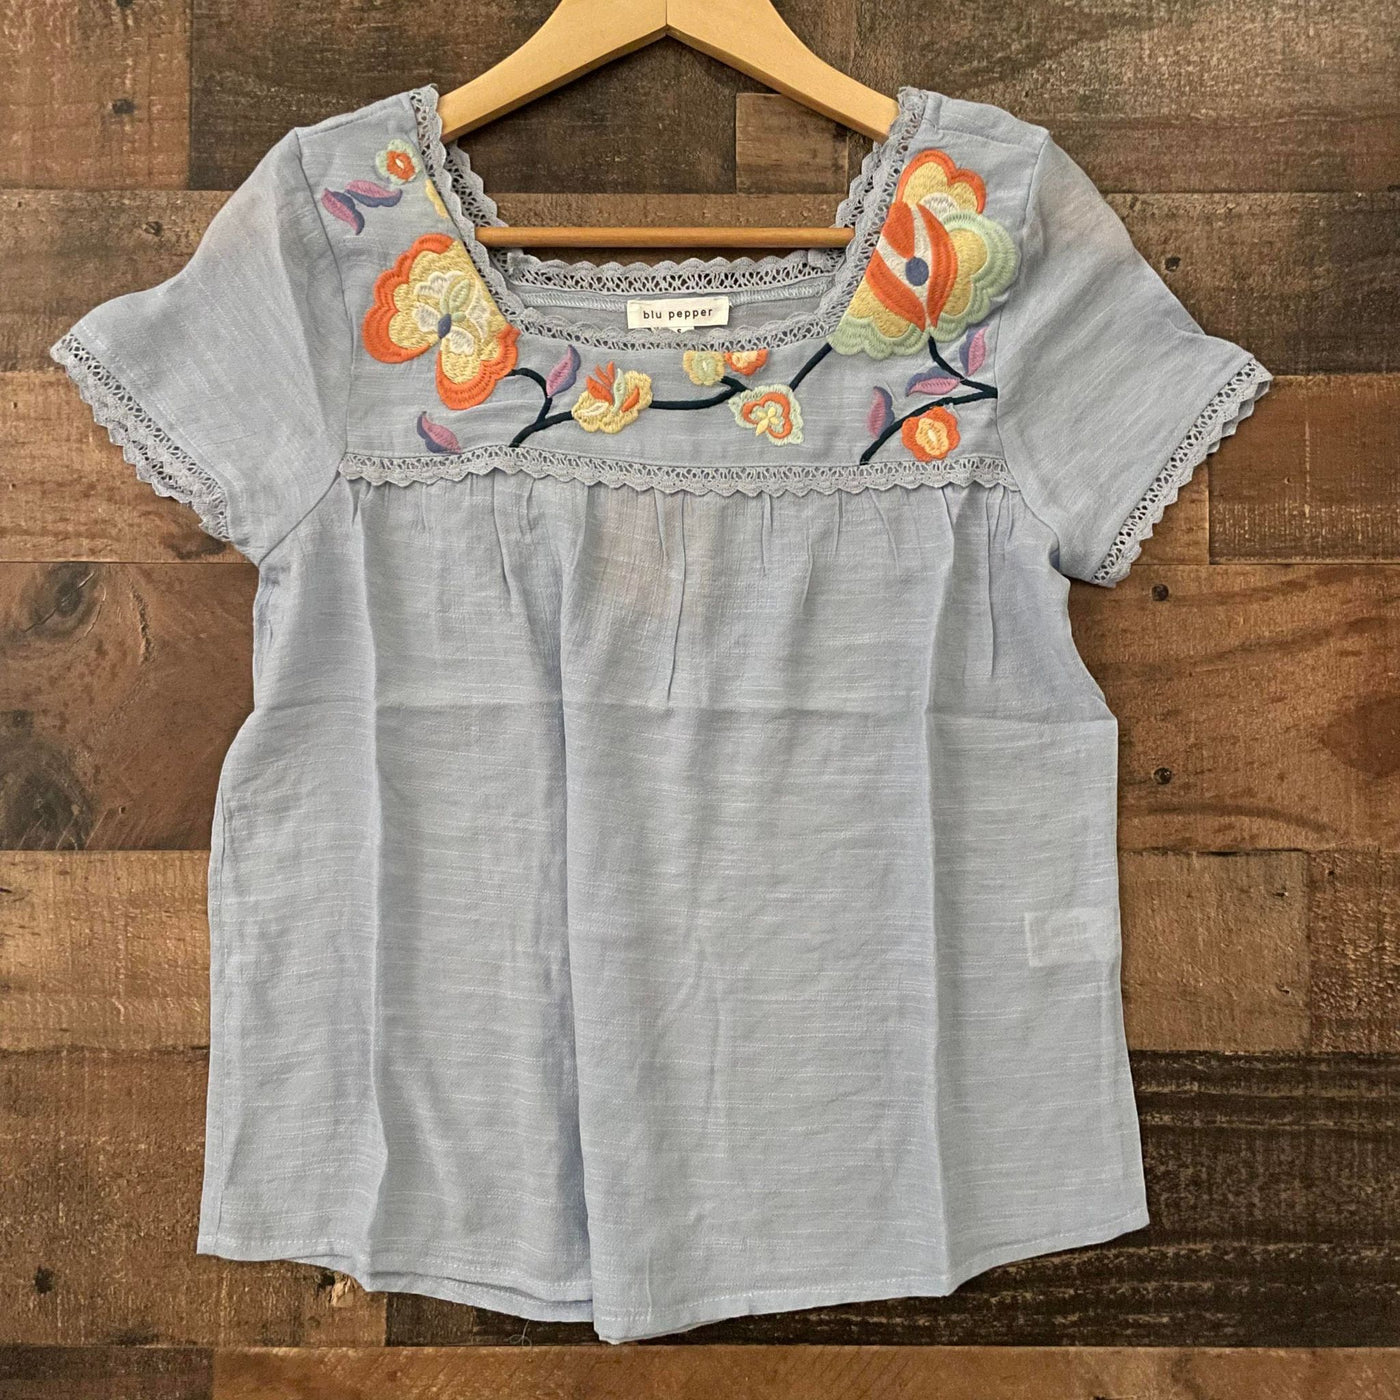 Whimsical Blooms: Flowy Short Sleeve Top with Embroidered Flowers